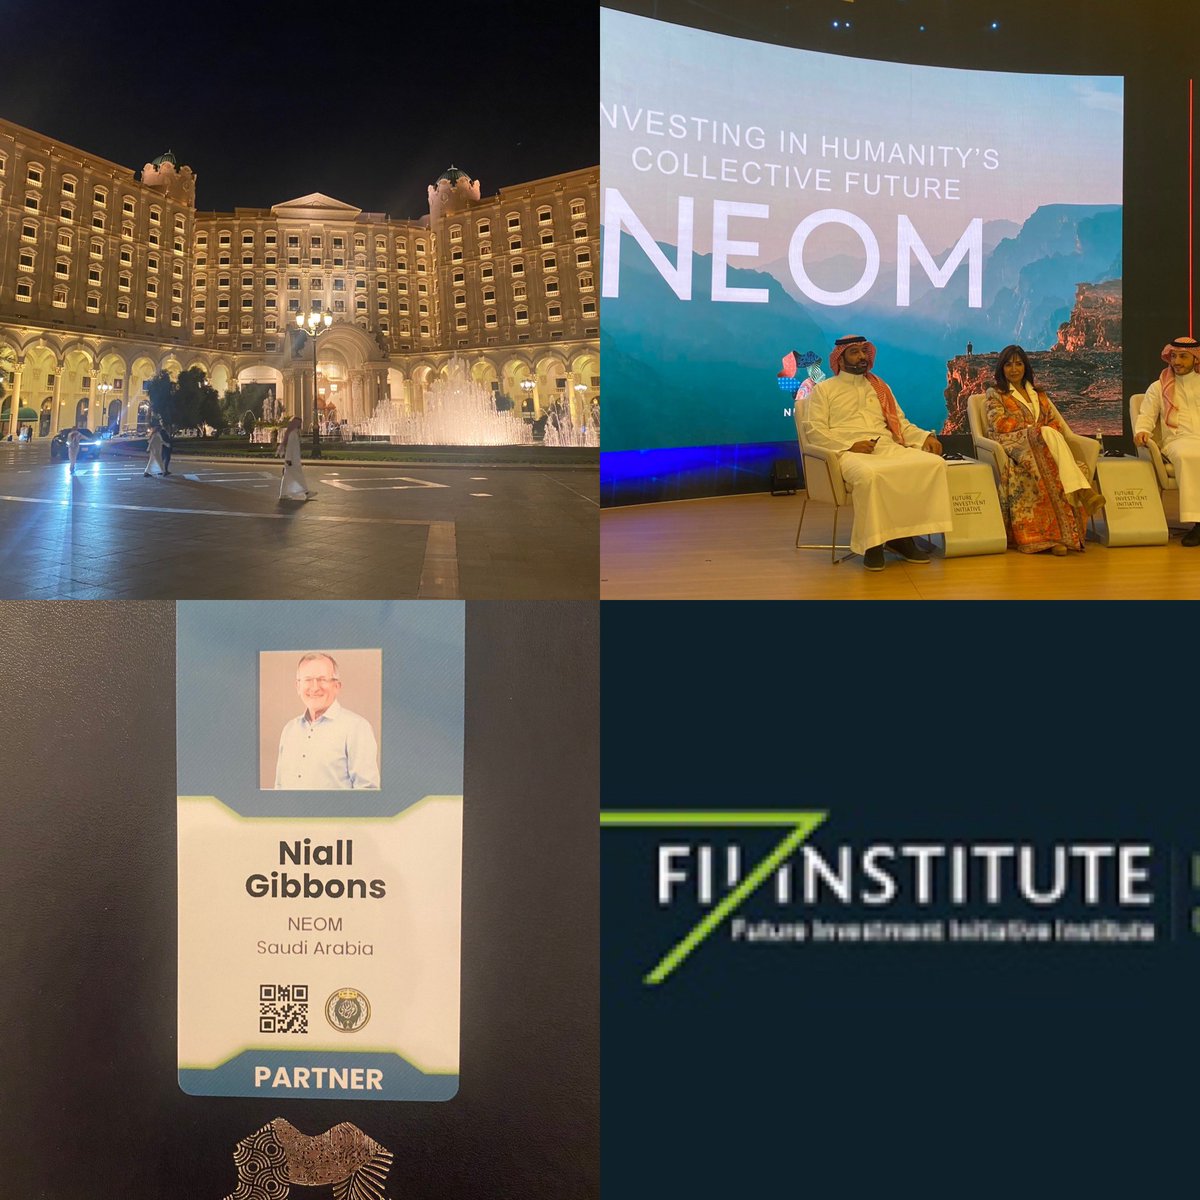 I was delighted to join my NEOM colleagues at the FII conference in Riyadh this week. Congratulations to the newly established NEOM Investment fund which is already announcing significant investments in smart and sustainable sectors.